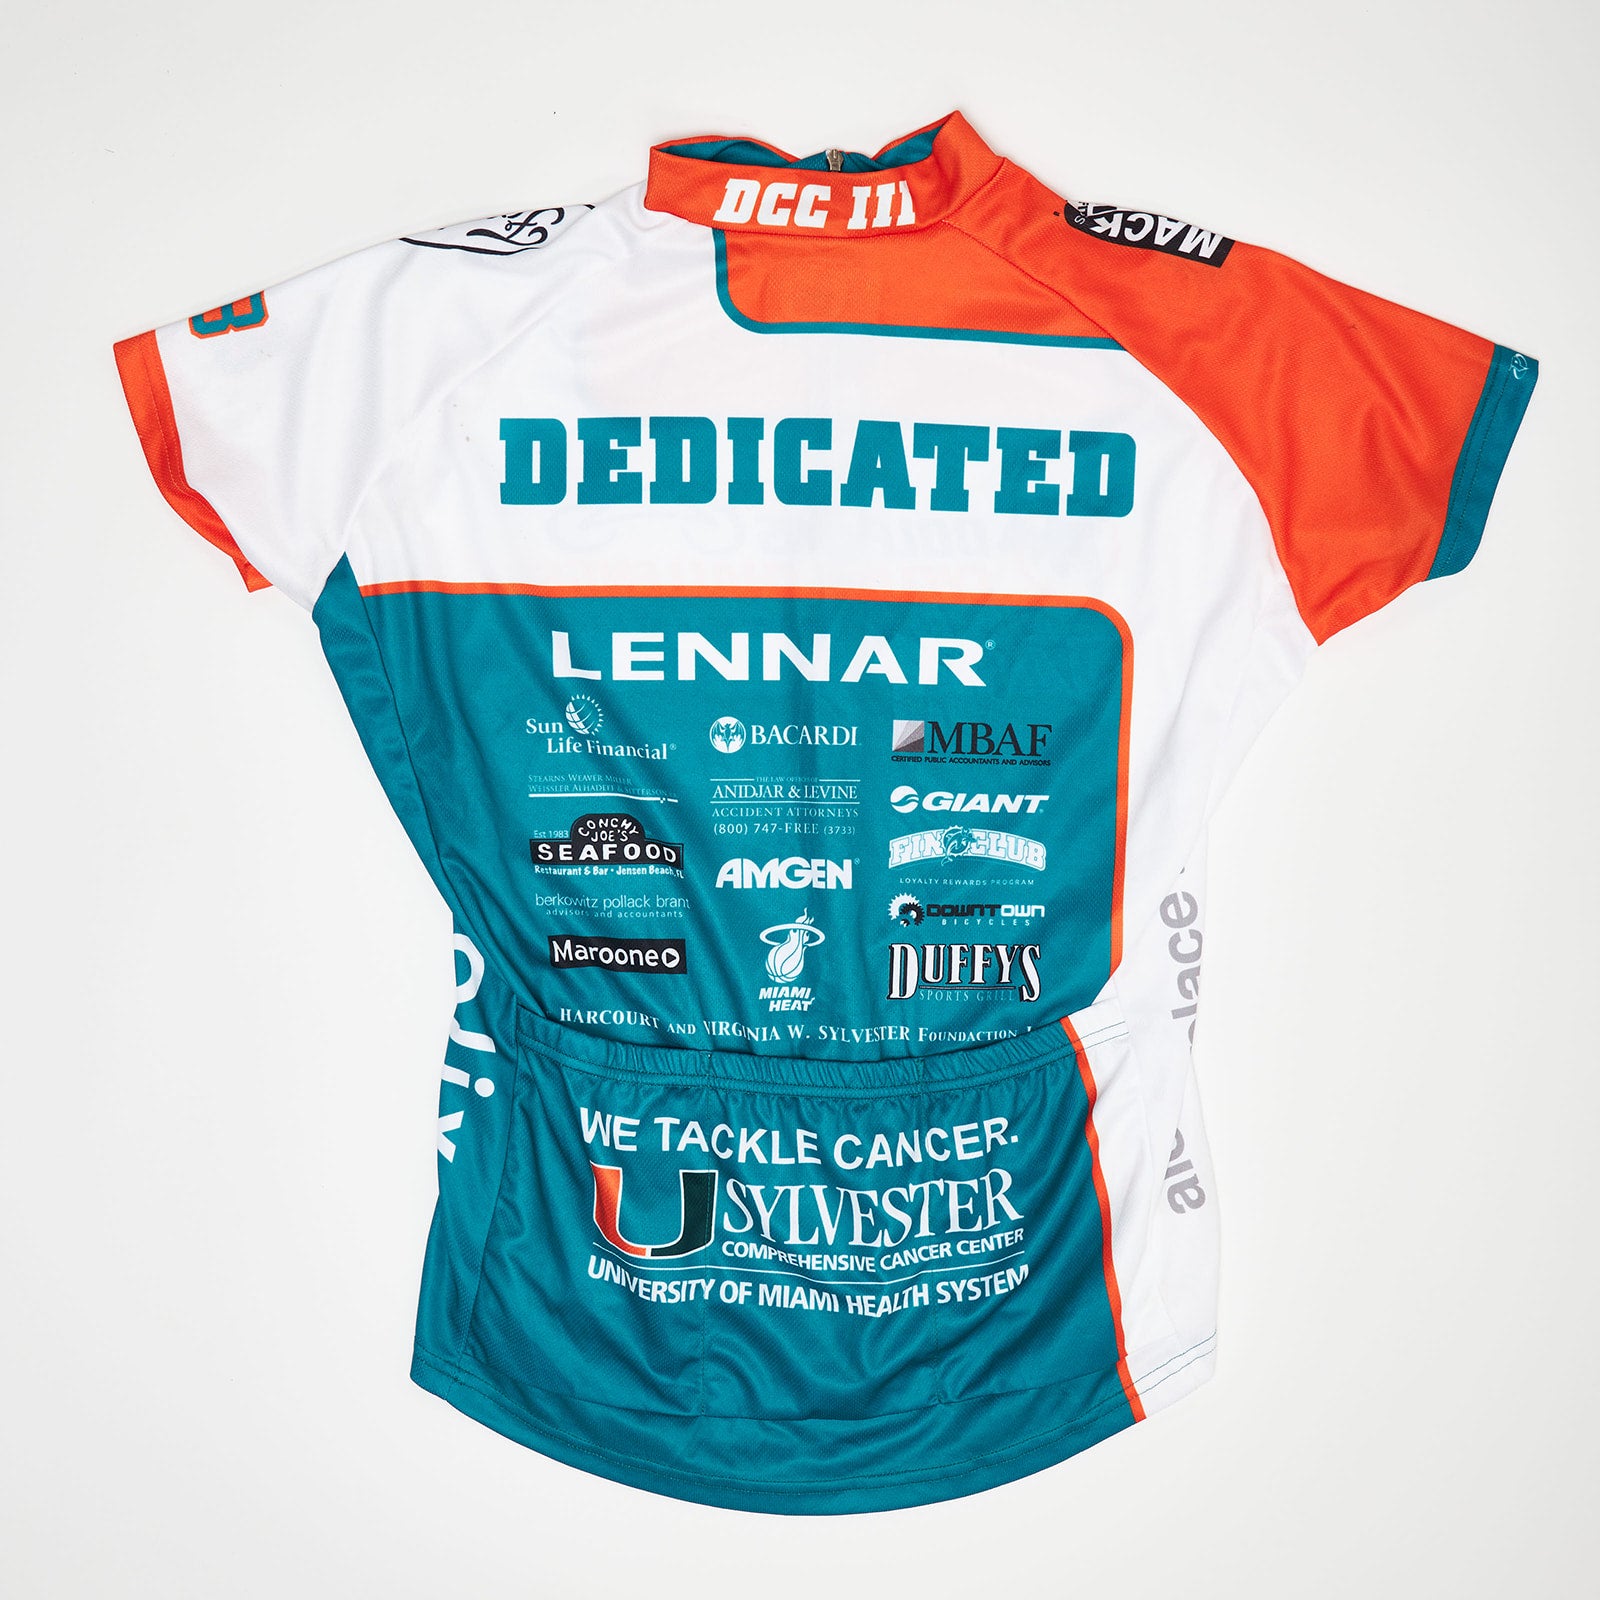 DCC III 2013 Women's Dolphins Cancer Challenge Cycling Jersey